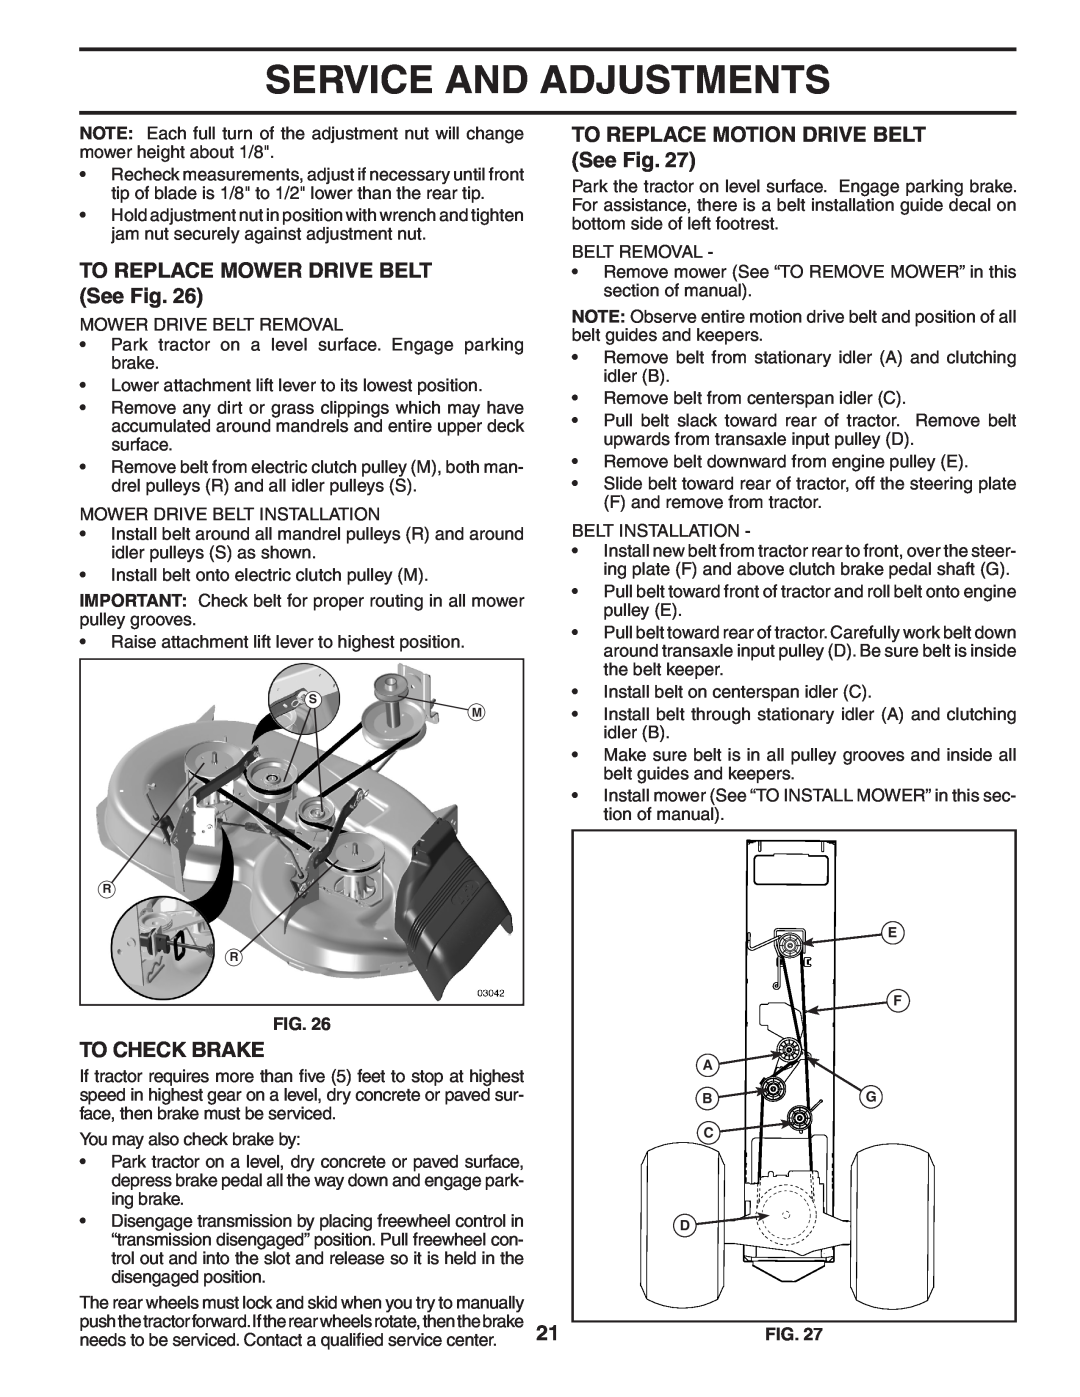 Poulan 96042000800, 402938 manual TO REPLACE MOWER DRIVE BELT See Fig, To Check Brake, TO REPLACE MOTION DRIVE BELT See Fig 